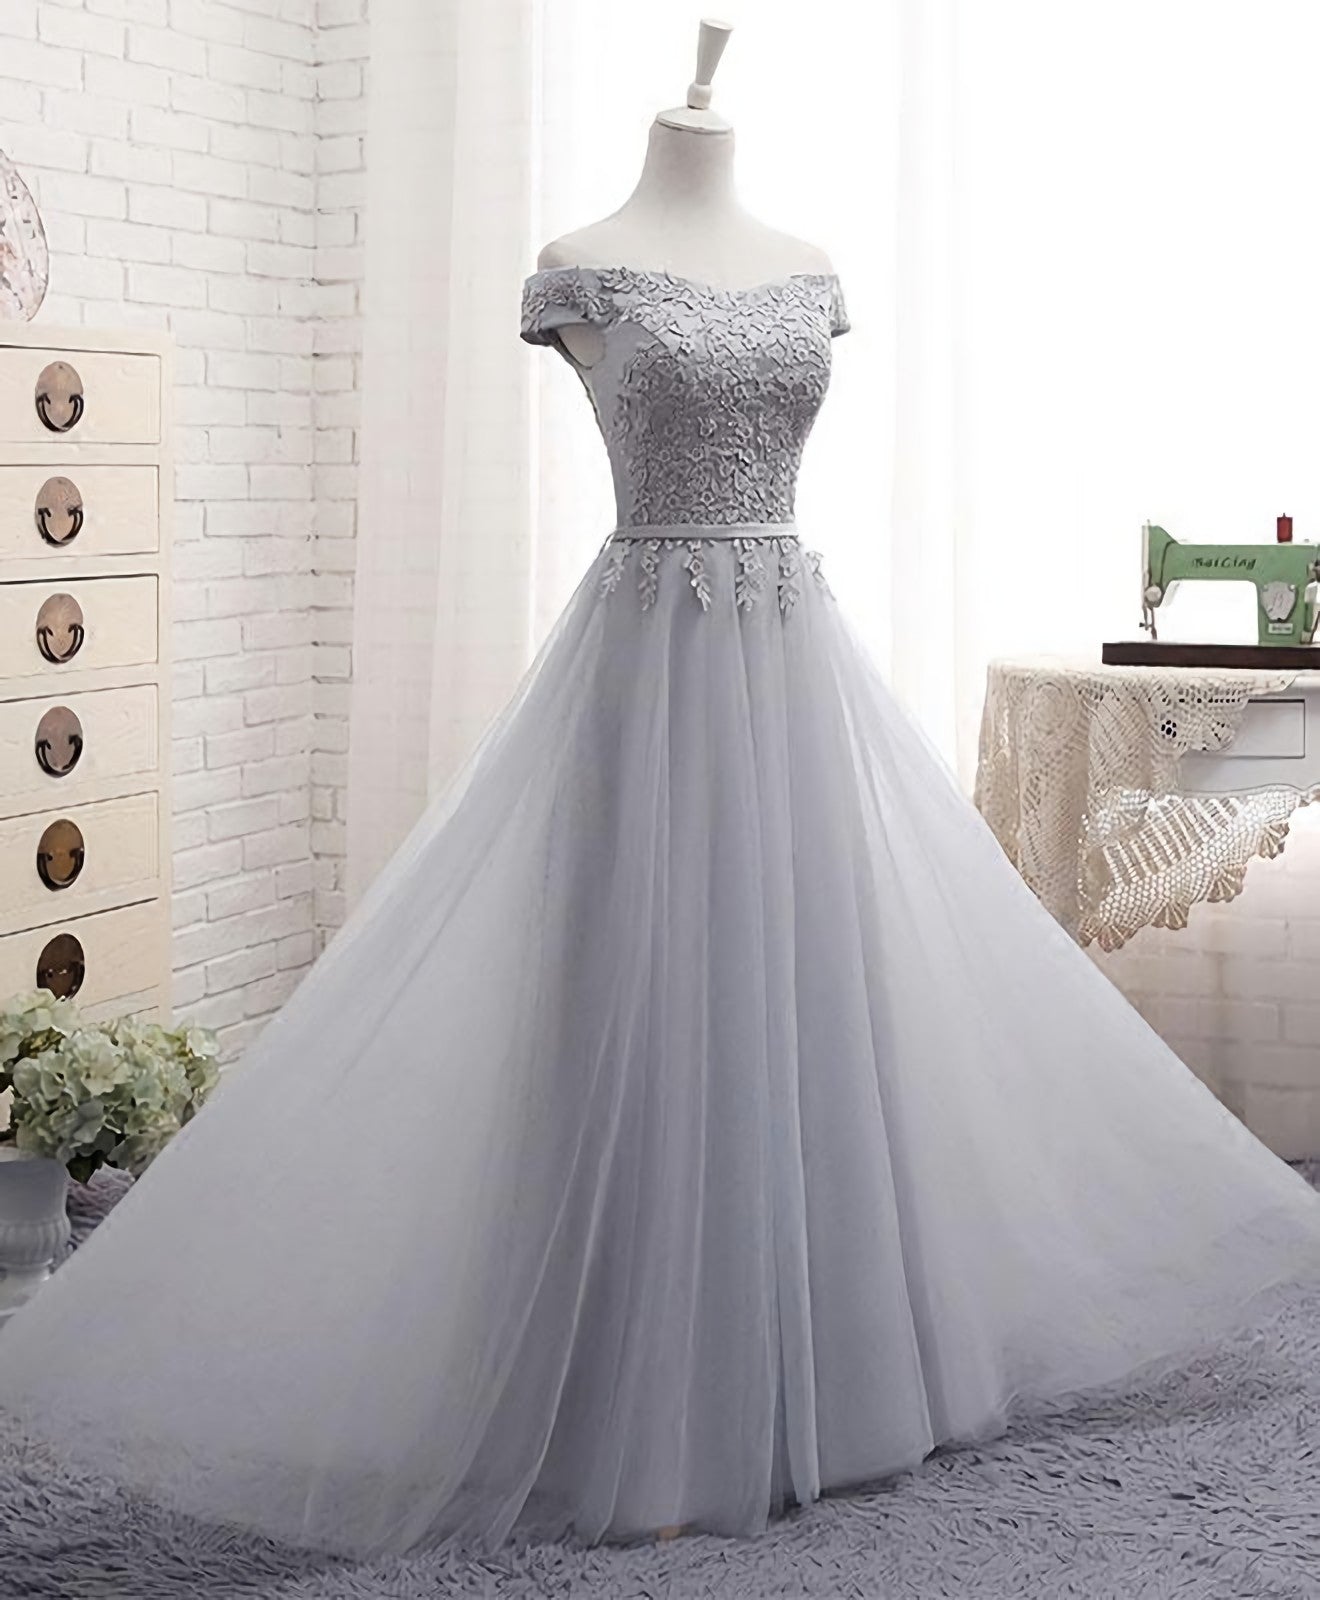 Bridesmaid Dress Shopping, Gray A Line Lace Off Shoulder Prom Dress, Lace Evening Dresses